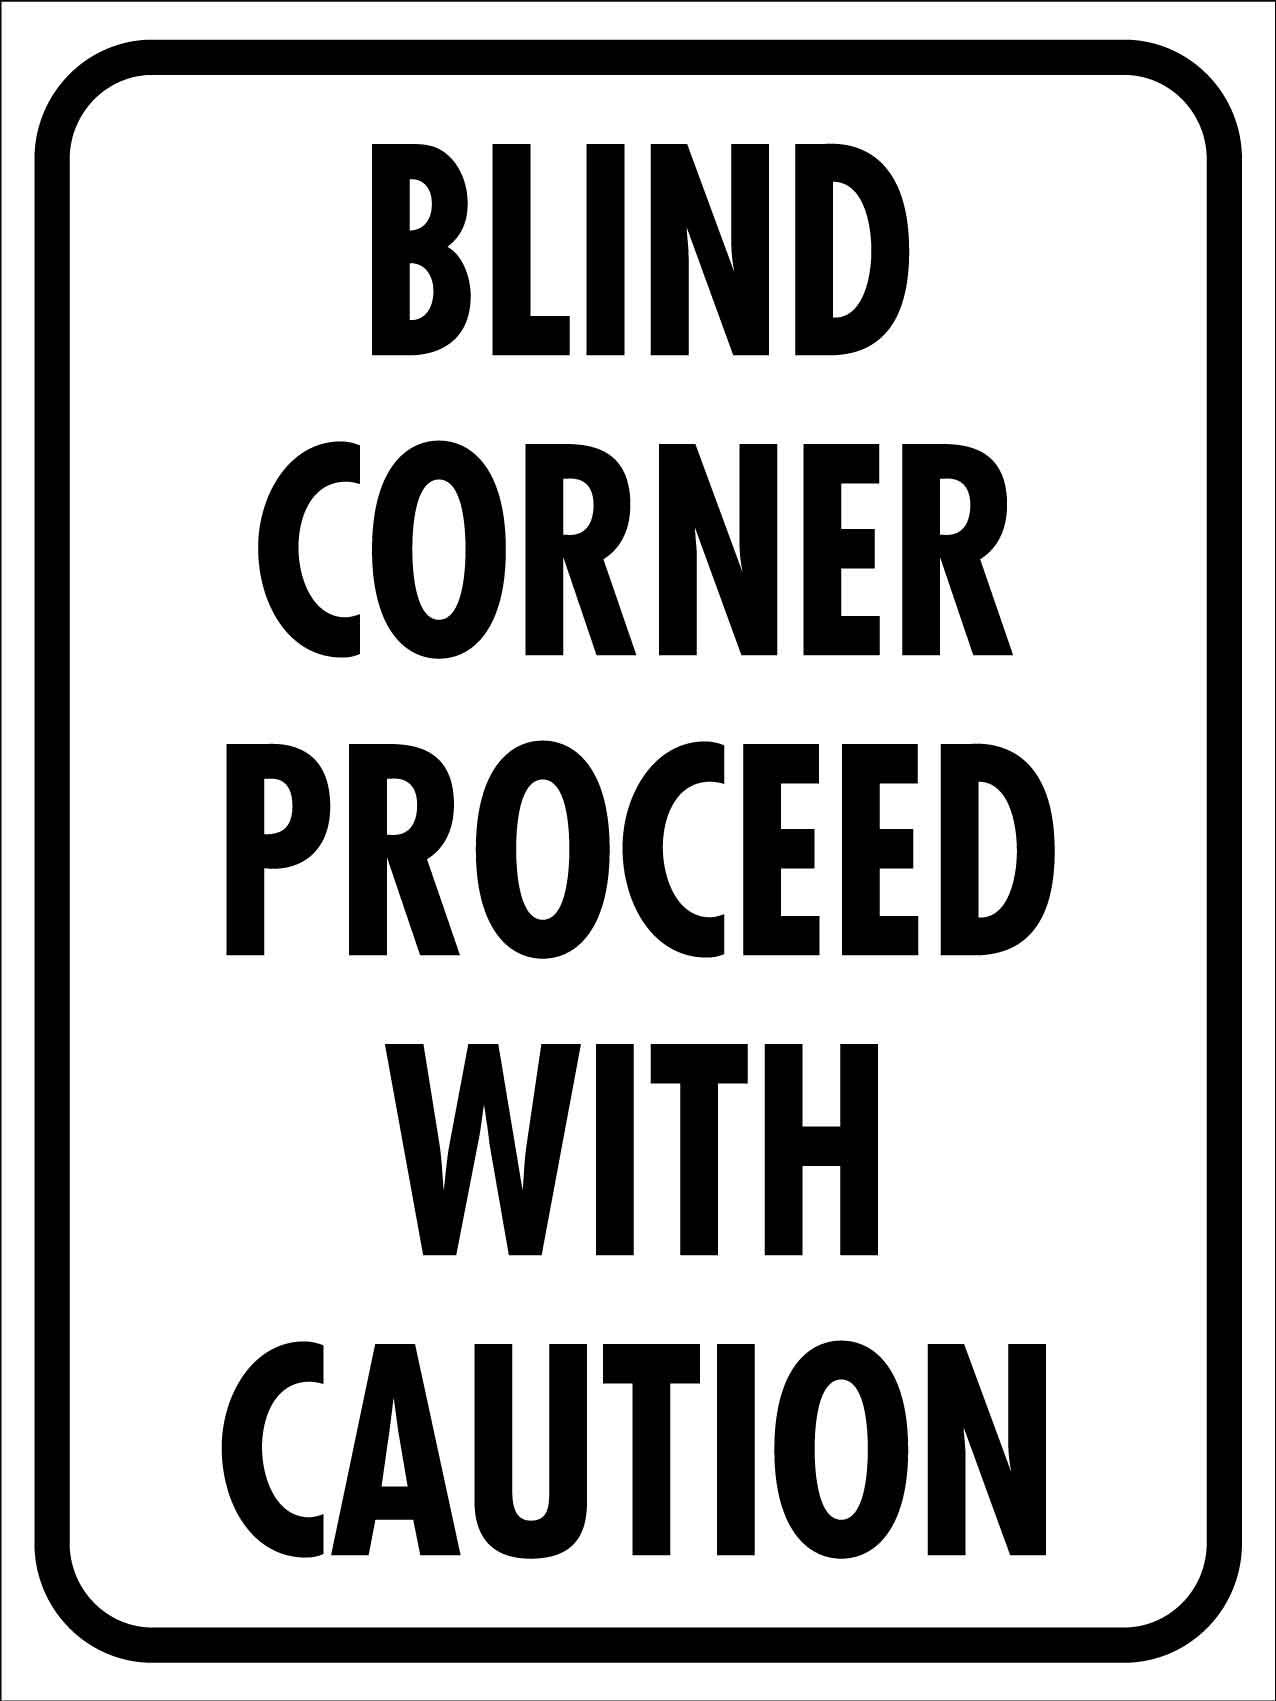 Blind Corner Proceed with Caution Sign